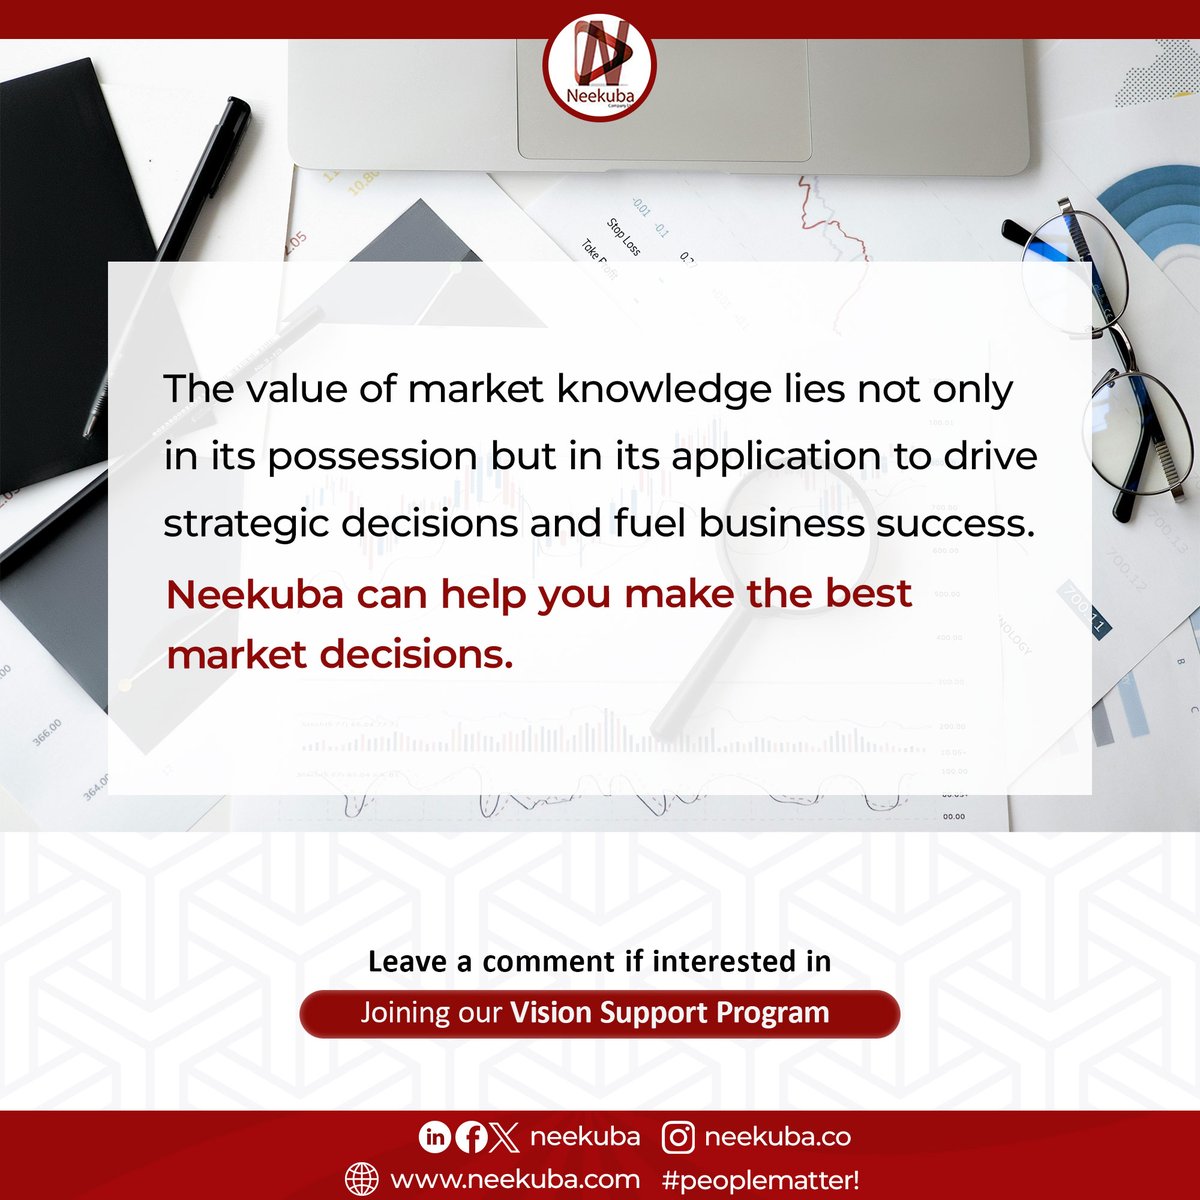 The value of market knowledge lies not only in its possession but in its application to drive strategic decisions and fuel business success.
Neekuba can help you make the best market decisions.

#neekuba #peoplematter #marketknowledge #business